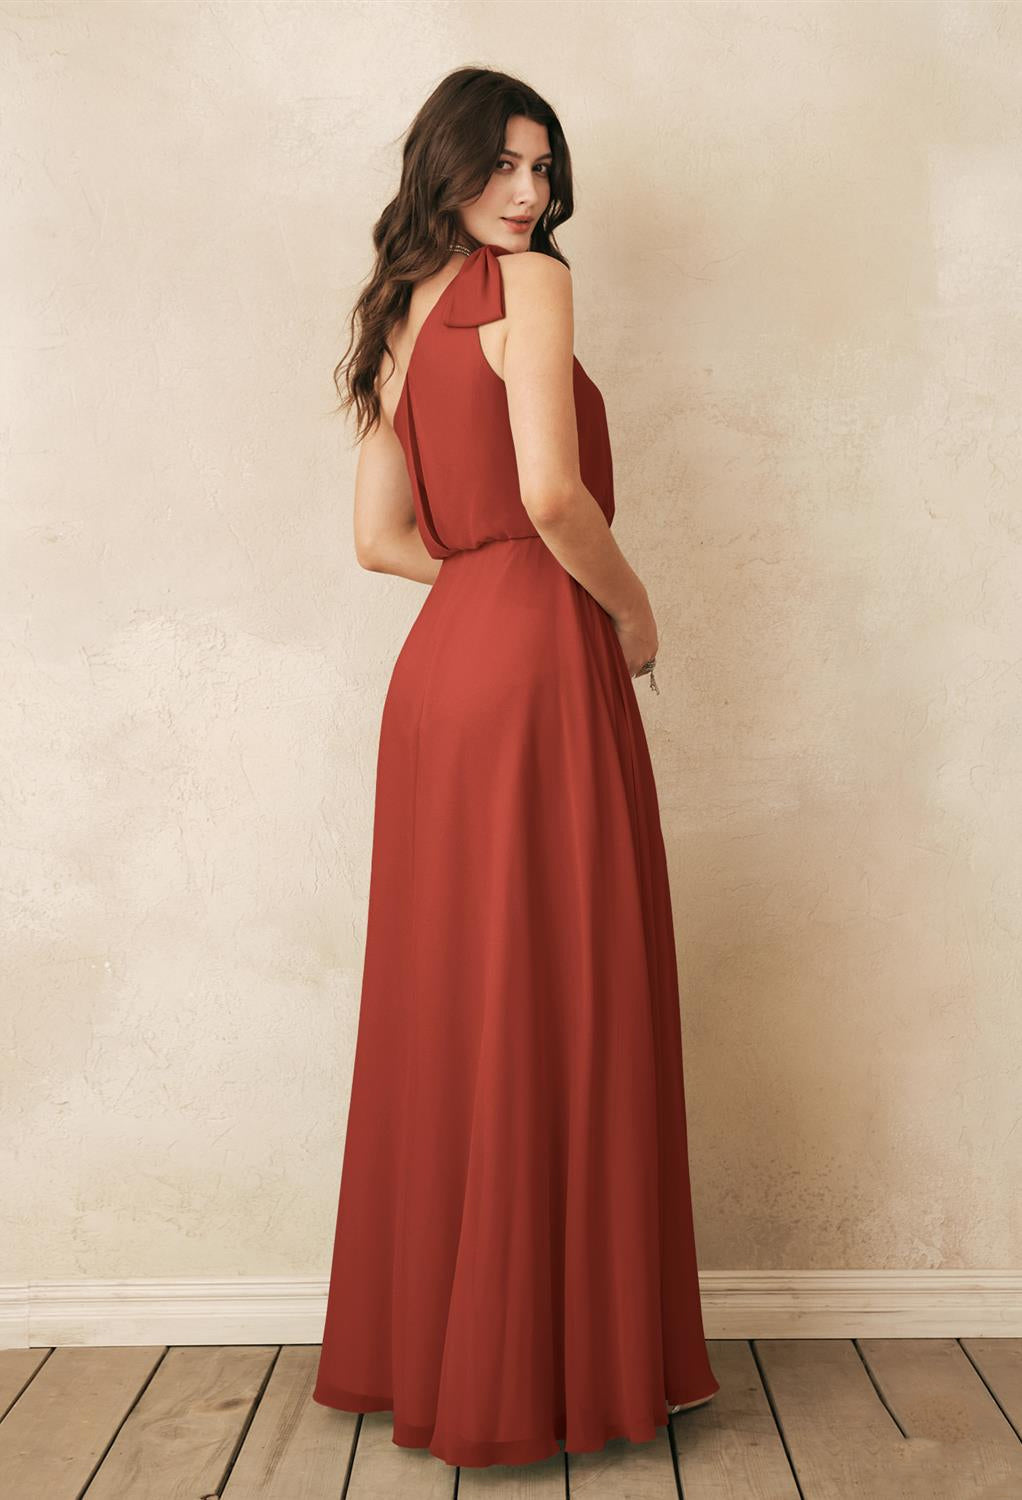 The back view of a woman wearing a Robina - Chiffon Bridesmaid Dress - Off The Rack in a Bergamot Bridal shop in London.